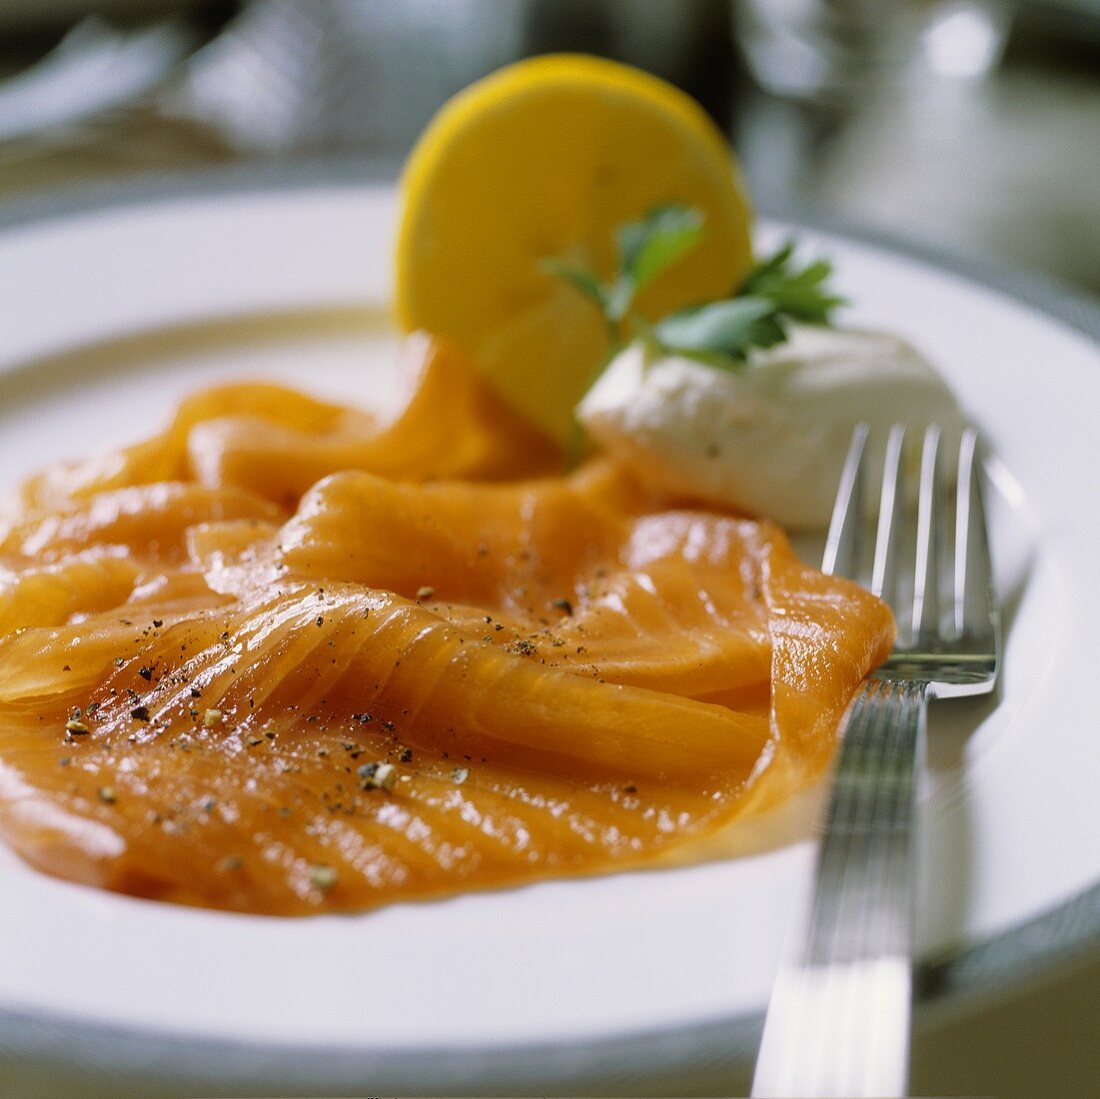 Slices of salmon on a plate with a fork